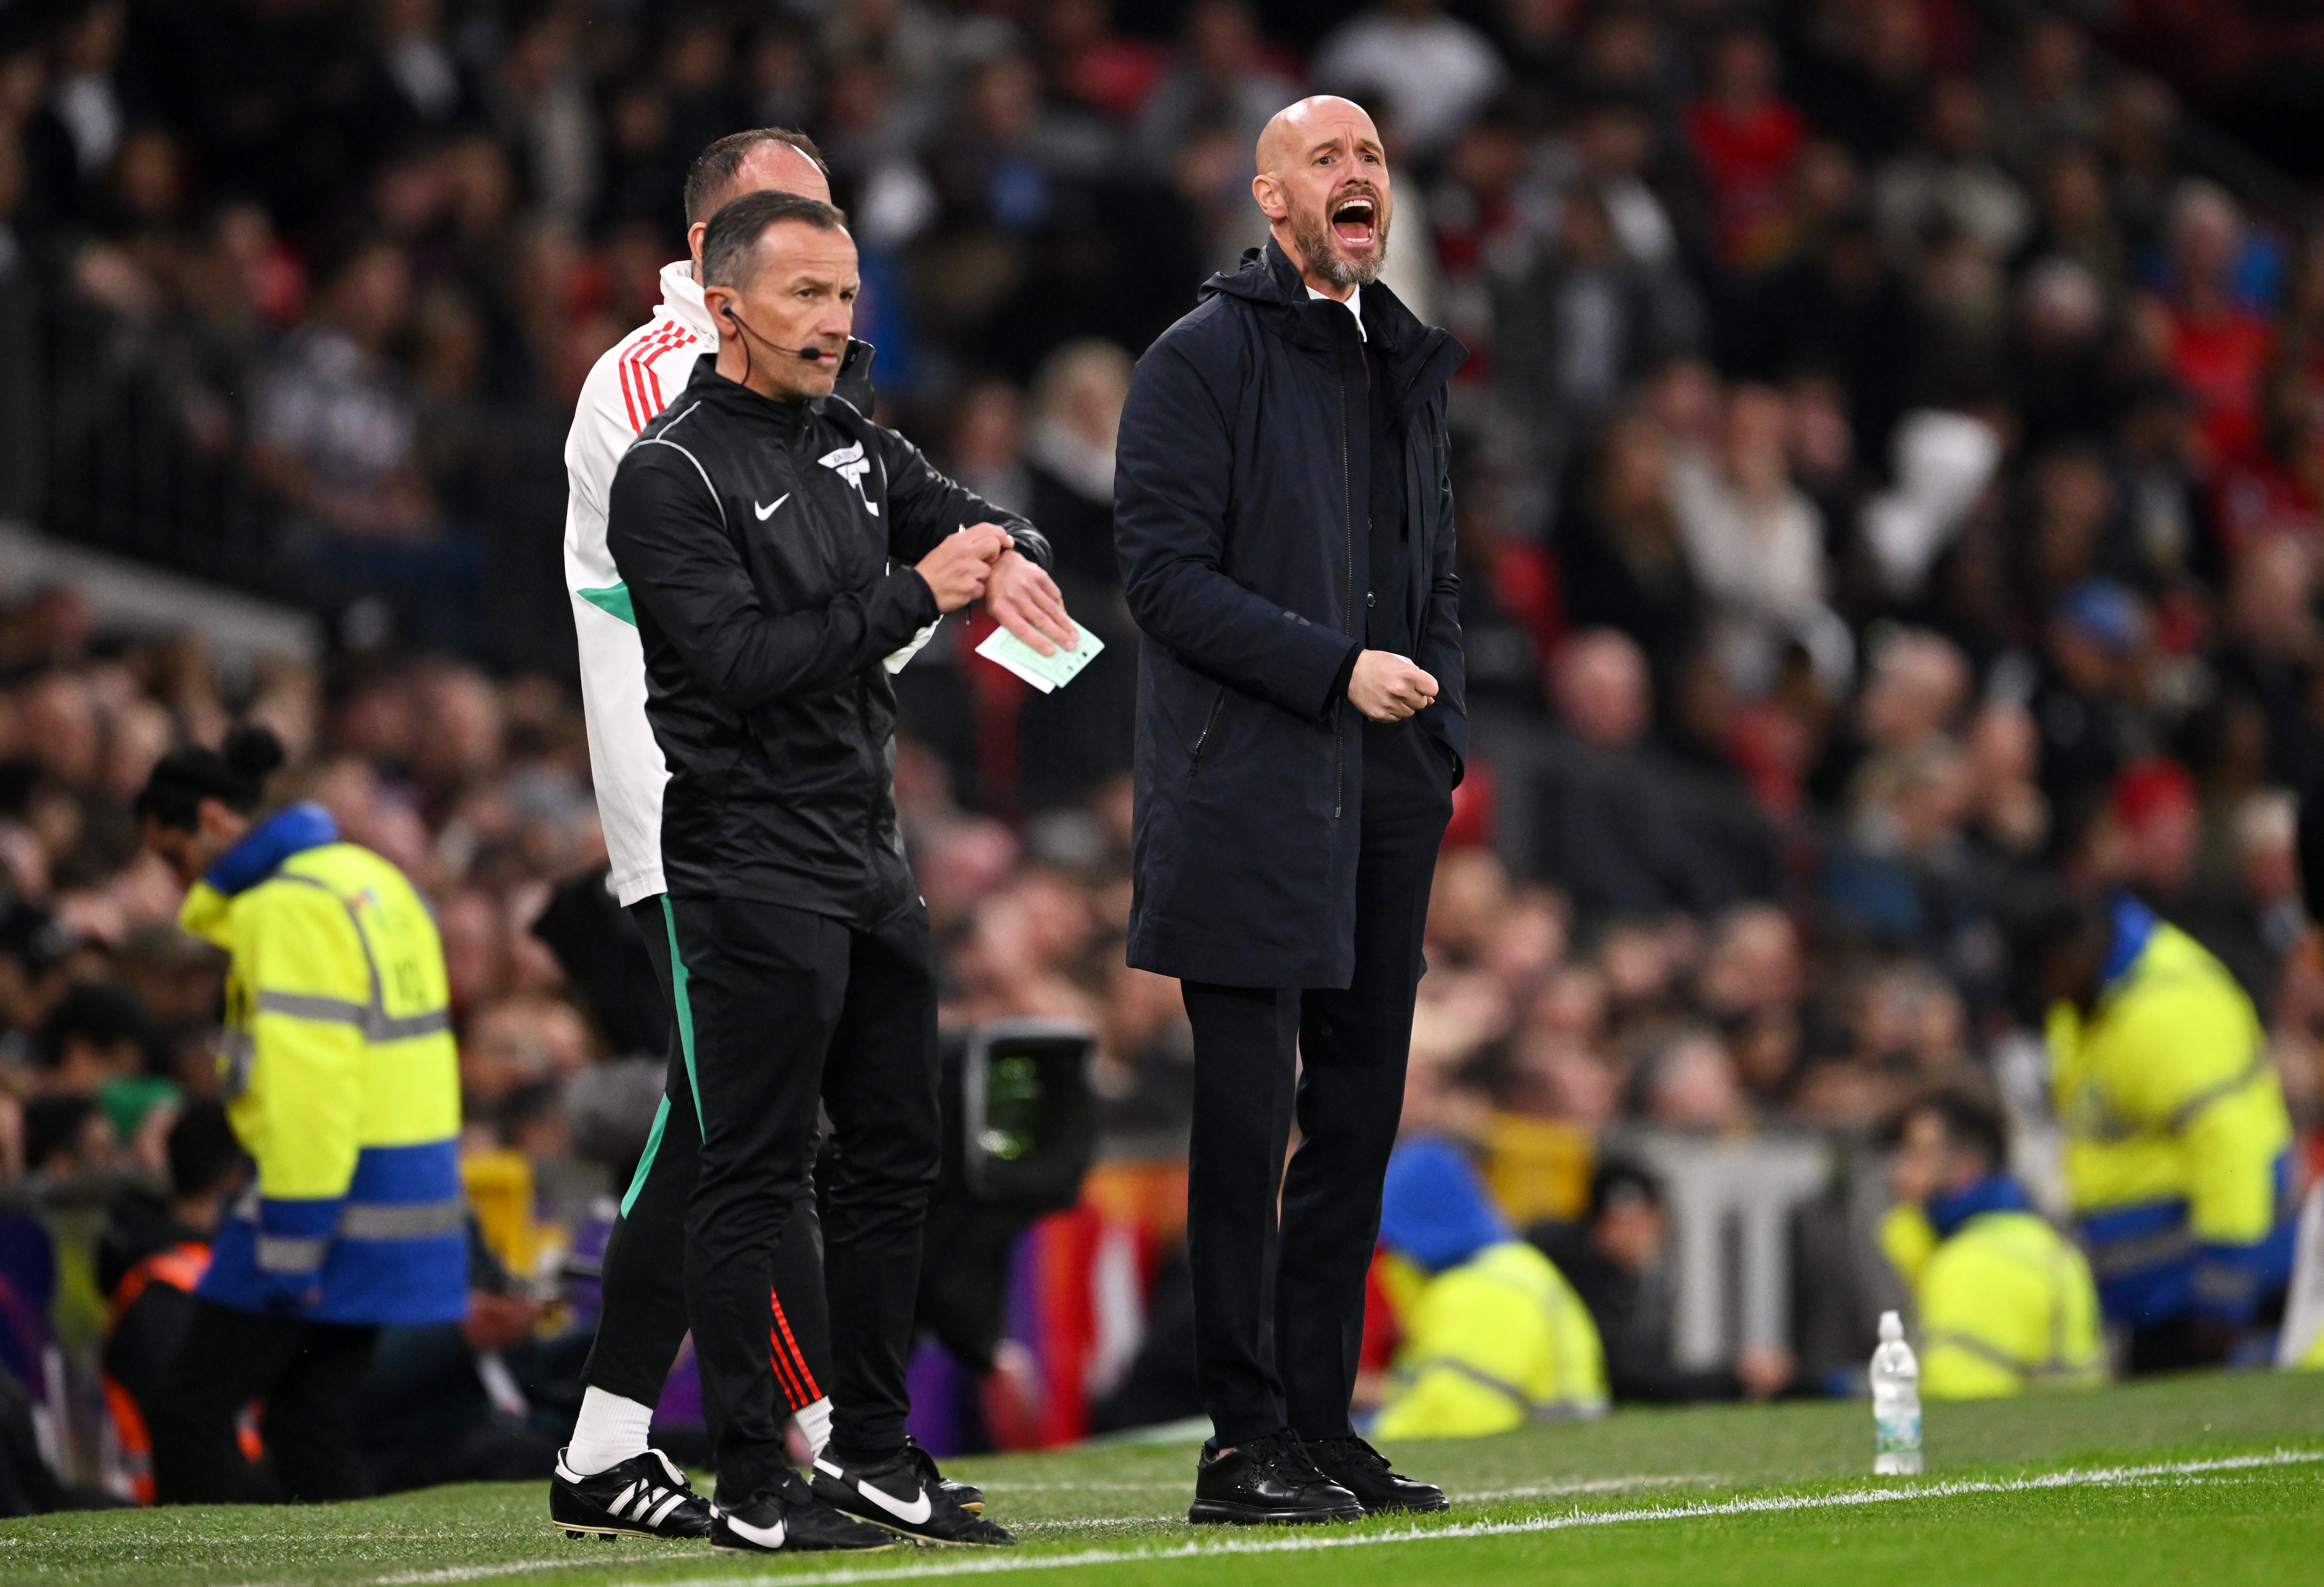 Man Utd boss Erik ten Hag had a great night at Old Trafford but there are signs his team still needs to improve.